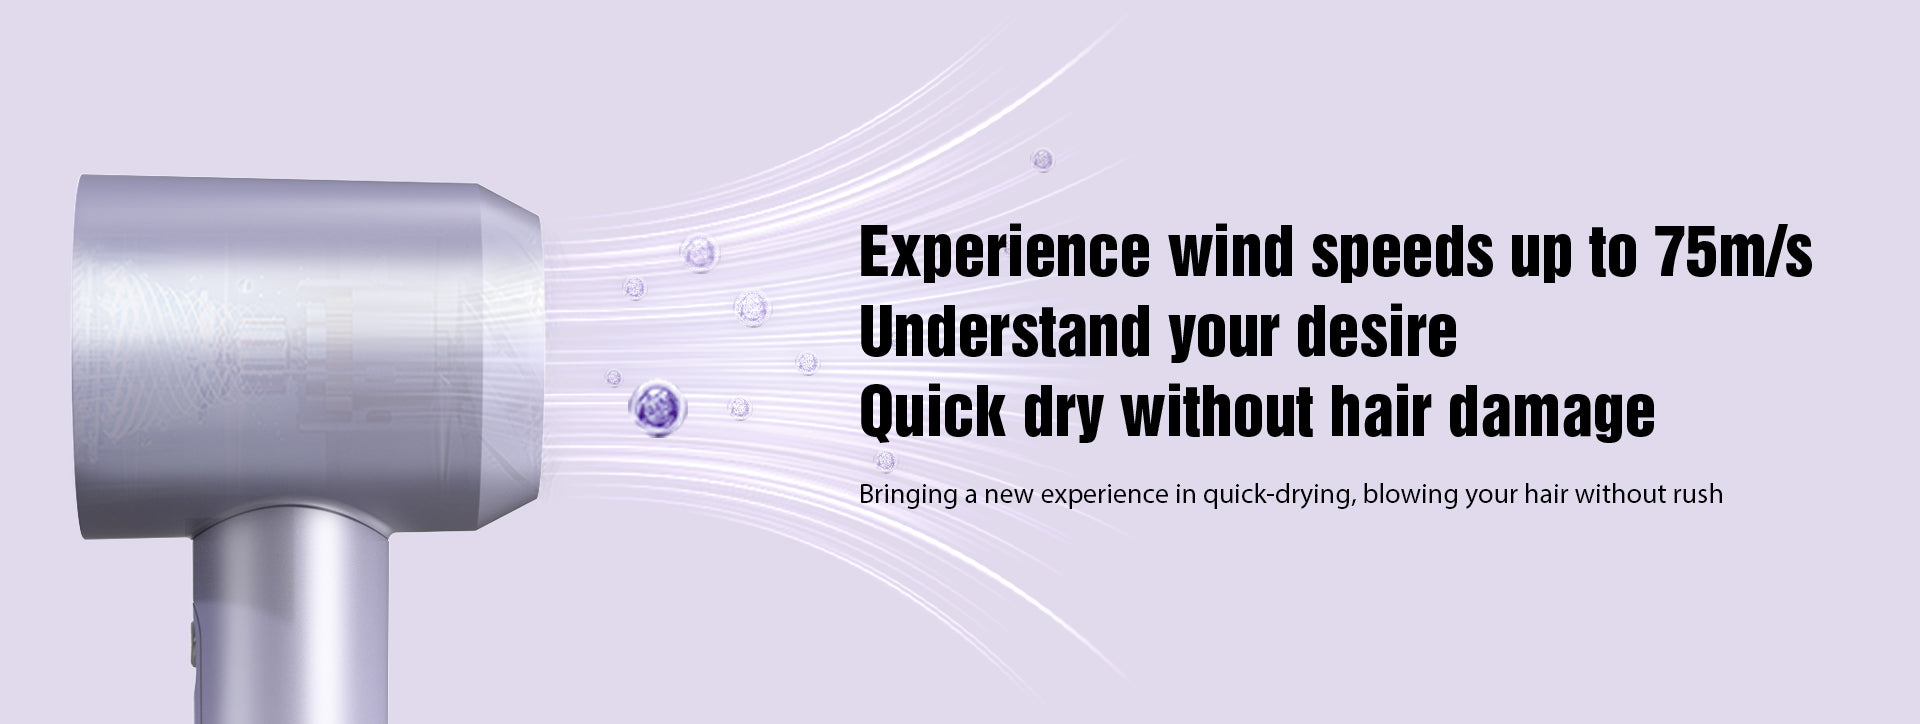 Experience_wind_speeds_up_to_75ms_Understand_your_desire_Quick_dry_without_hair_damage